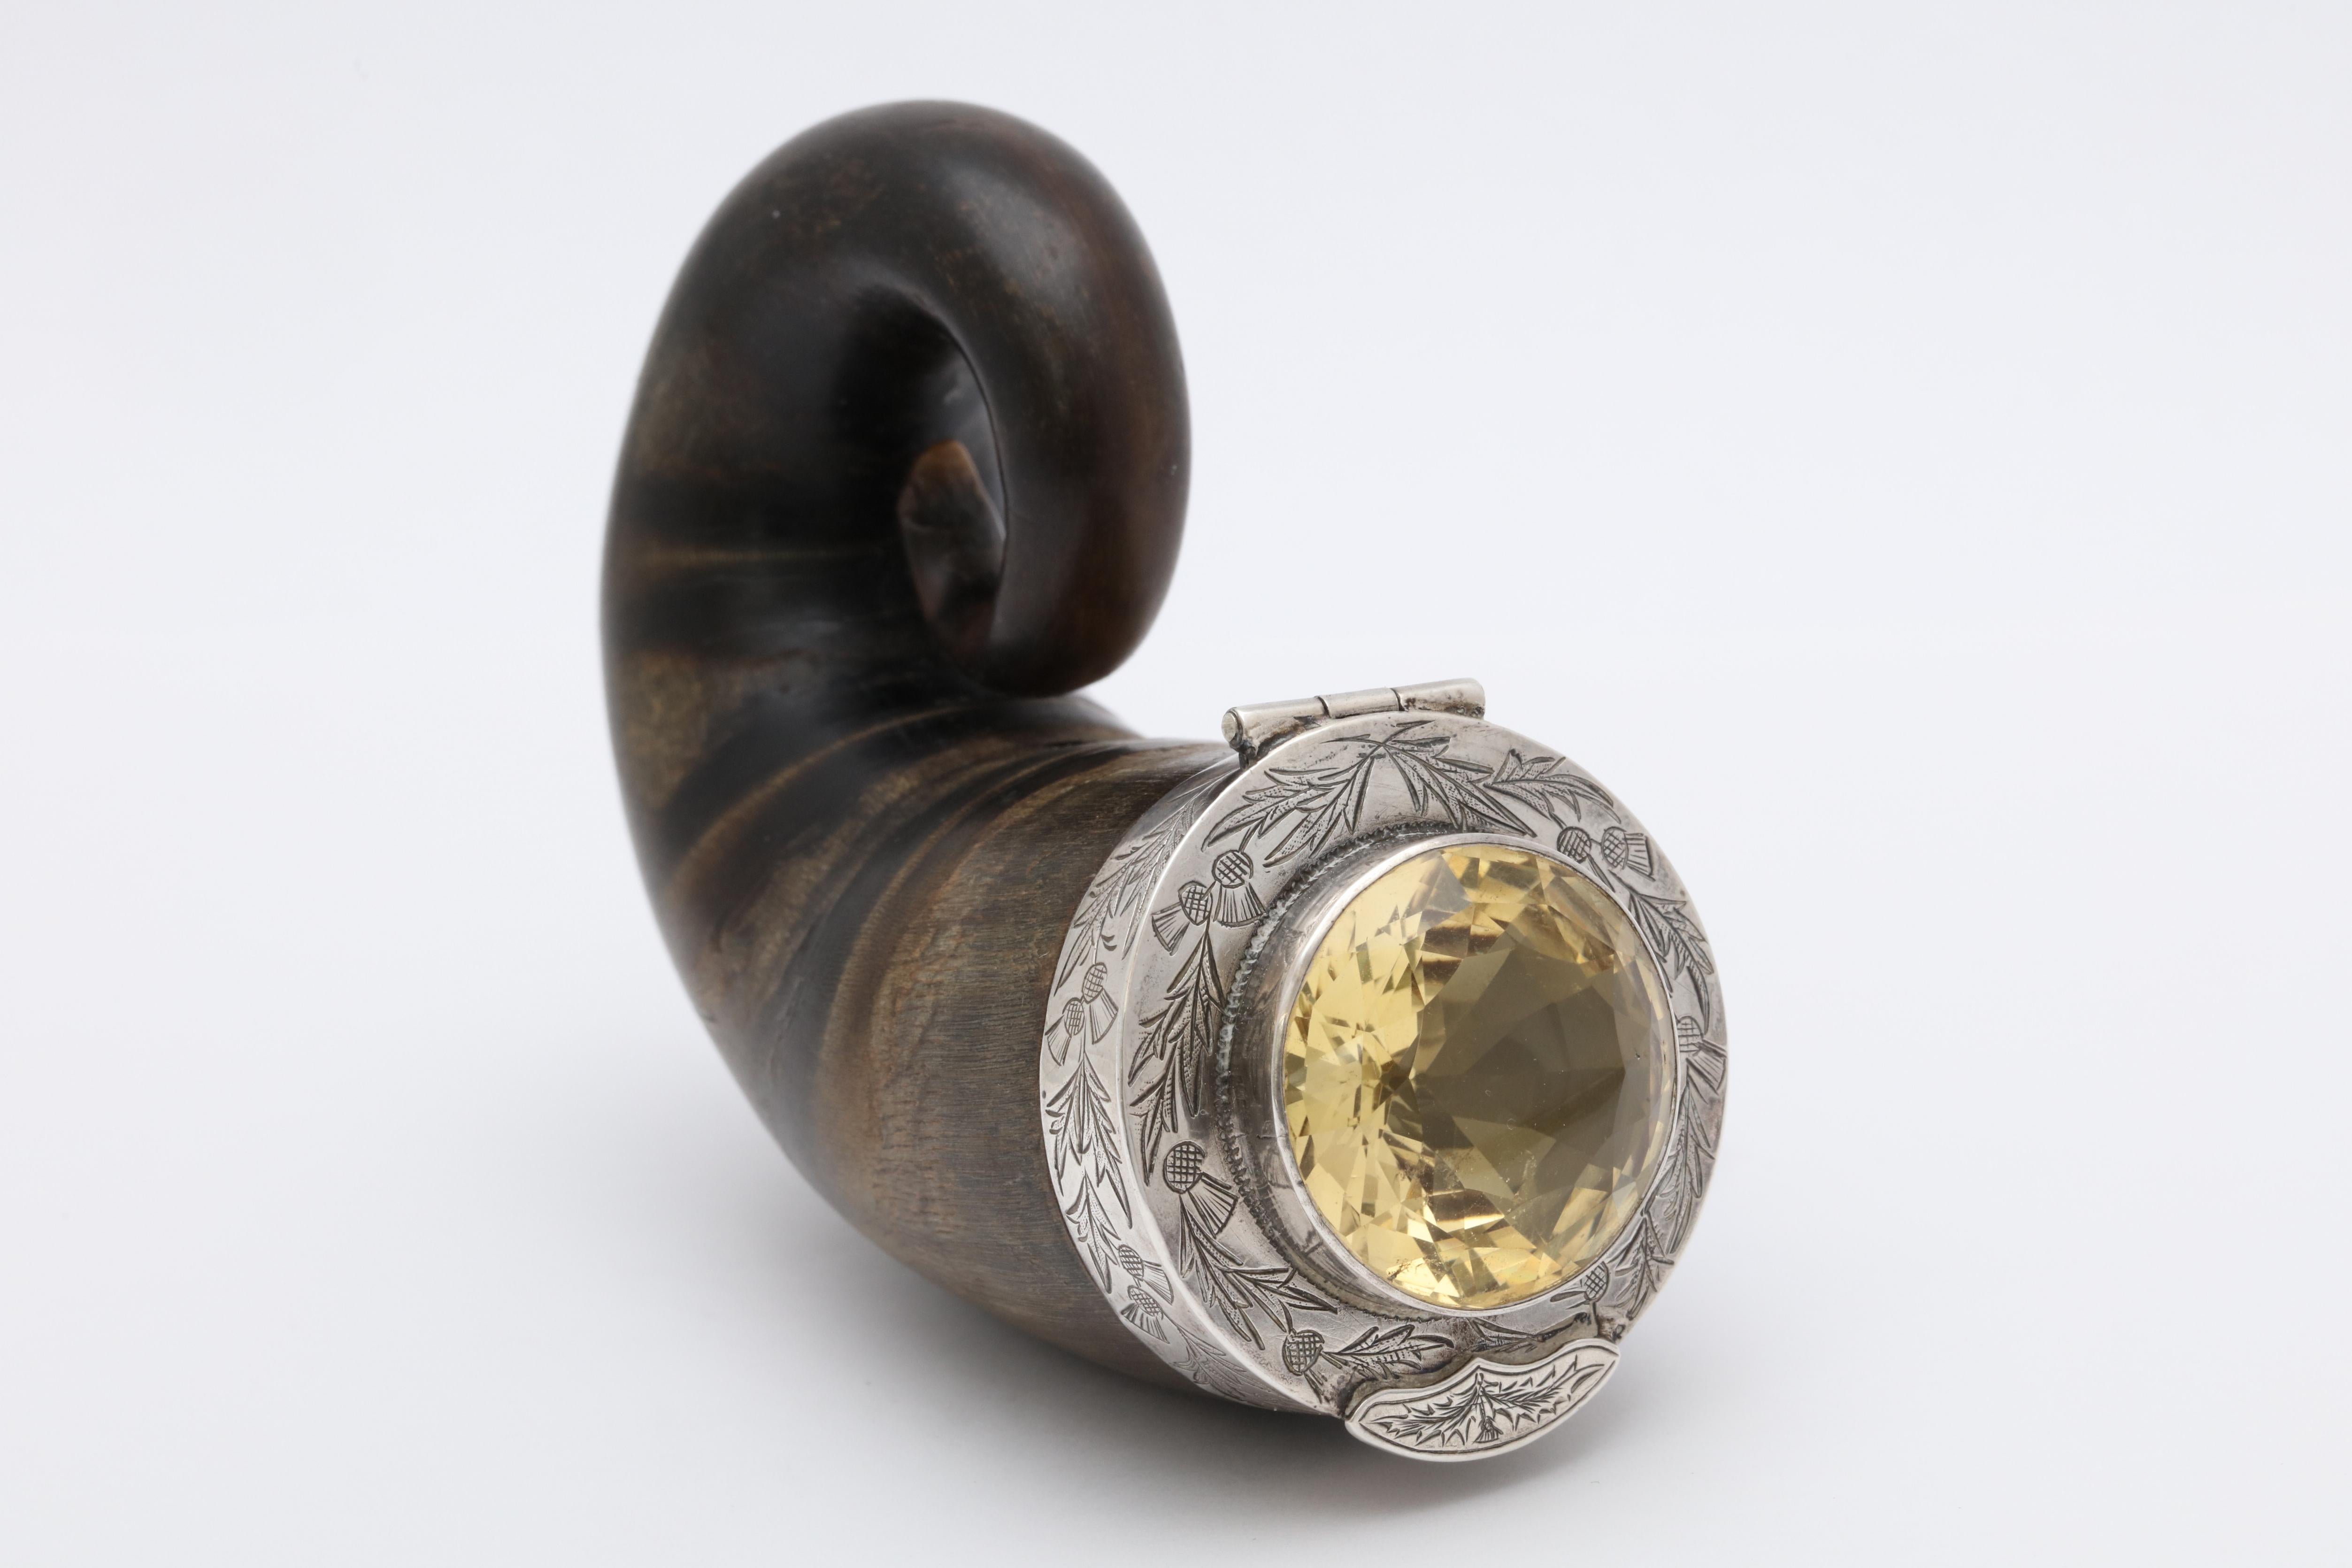 Georgian (George III), sterling silver-mounted (unmarked, but tested) ram's horn snuff mull, the hinged lid having a central cairngorm stone, Scotland, circa 1790-1810. Sterling silver mount is etched with Scottish thistles. Measures: almost 3 1/2